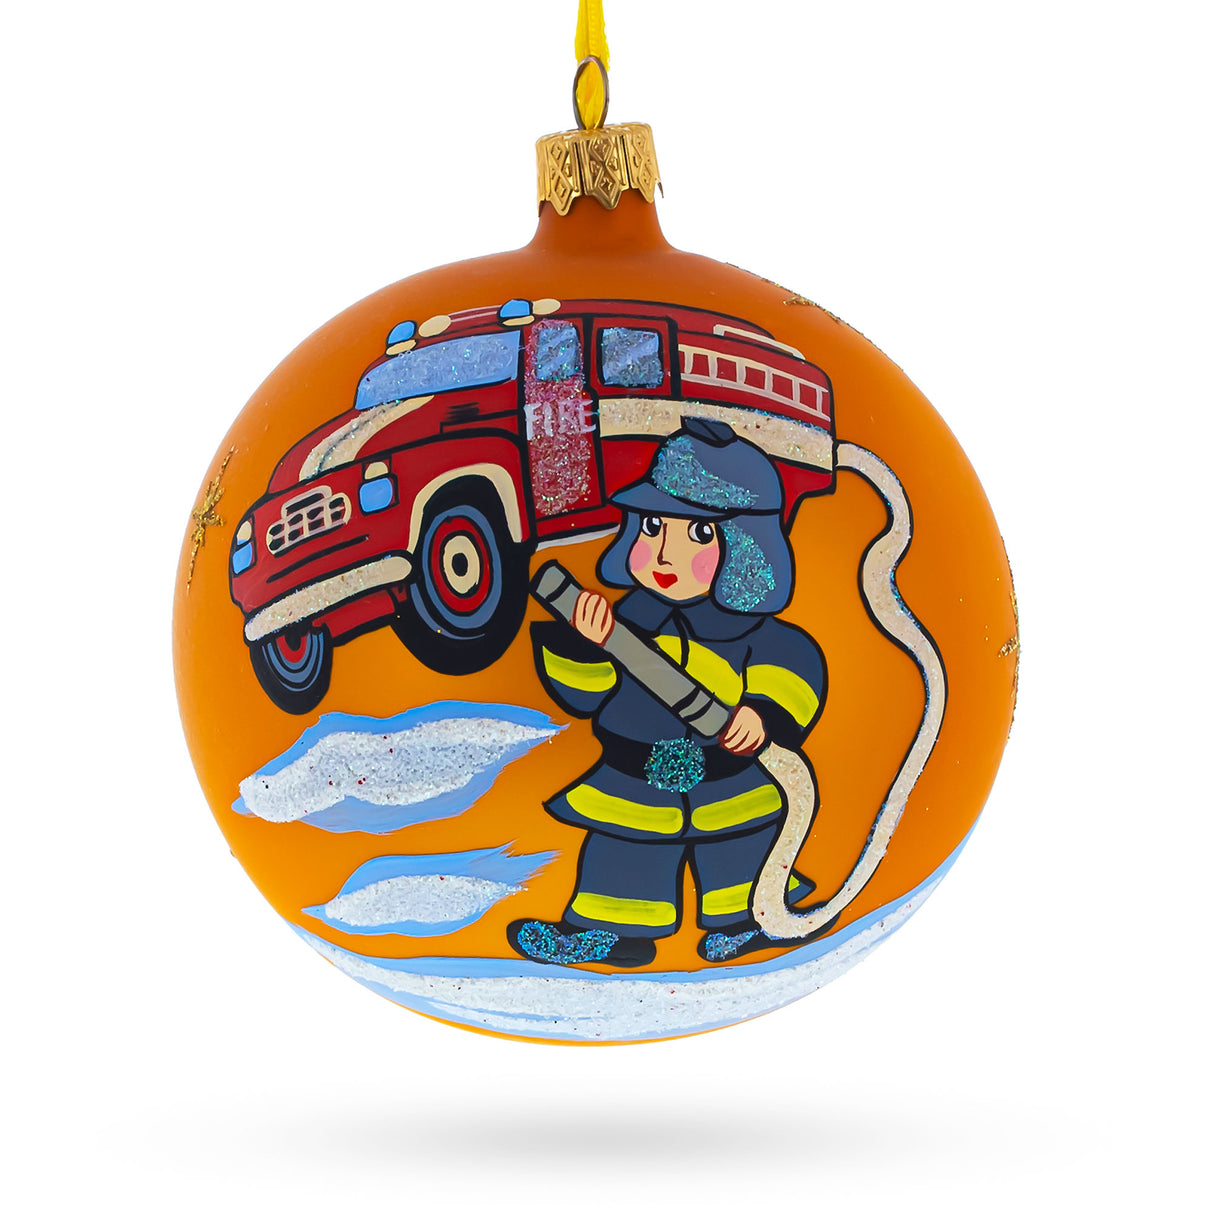 Glass Brave Little Fireman: Hand-Painted Blown Glass Ball Christmas Ornament 4 Inches in Orange color Round